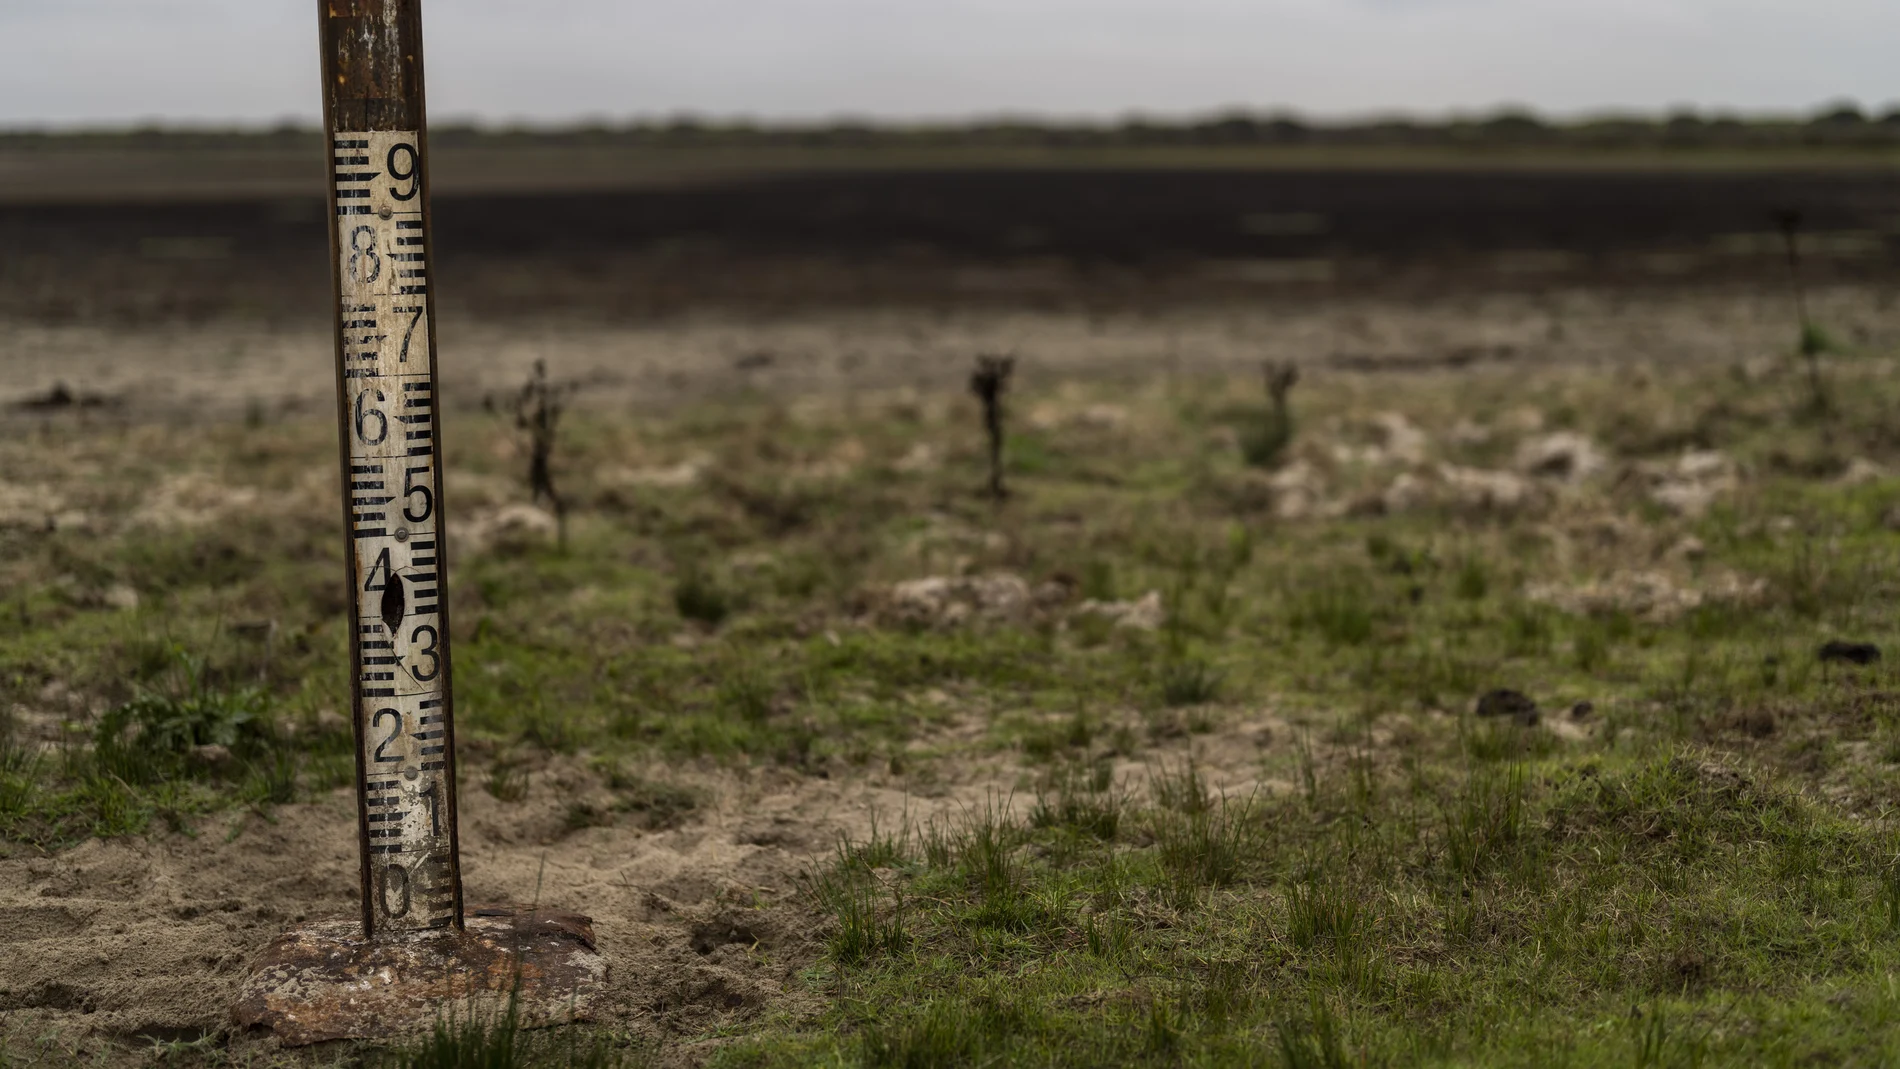 FILE - A water meter stands in a dry wetland in Donana natural park, southwest Spain, on Oct. 19, 2022. Lawmakers in Spainís southern Andalusia region are set Wednesday April 12, 2023 to vote in favor of rezoning lands near one of Europeís most prized wetlands as irrigable against the advice of ecologists and repeated warnings from European officials. 